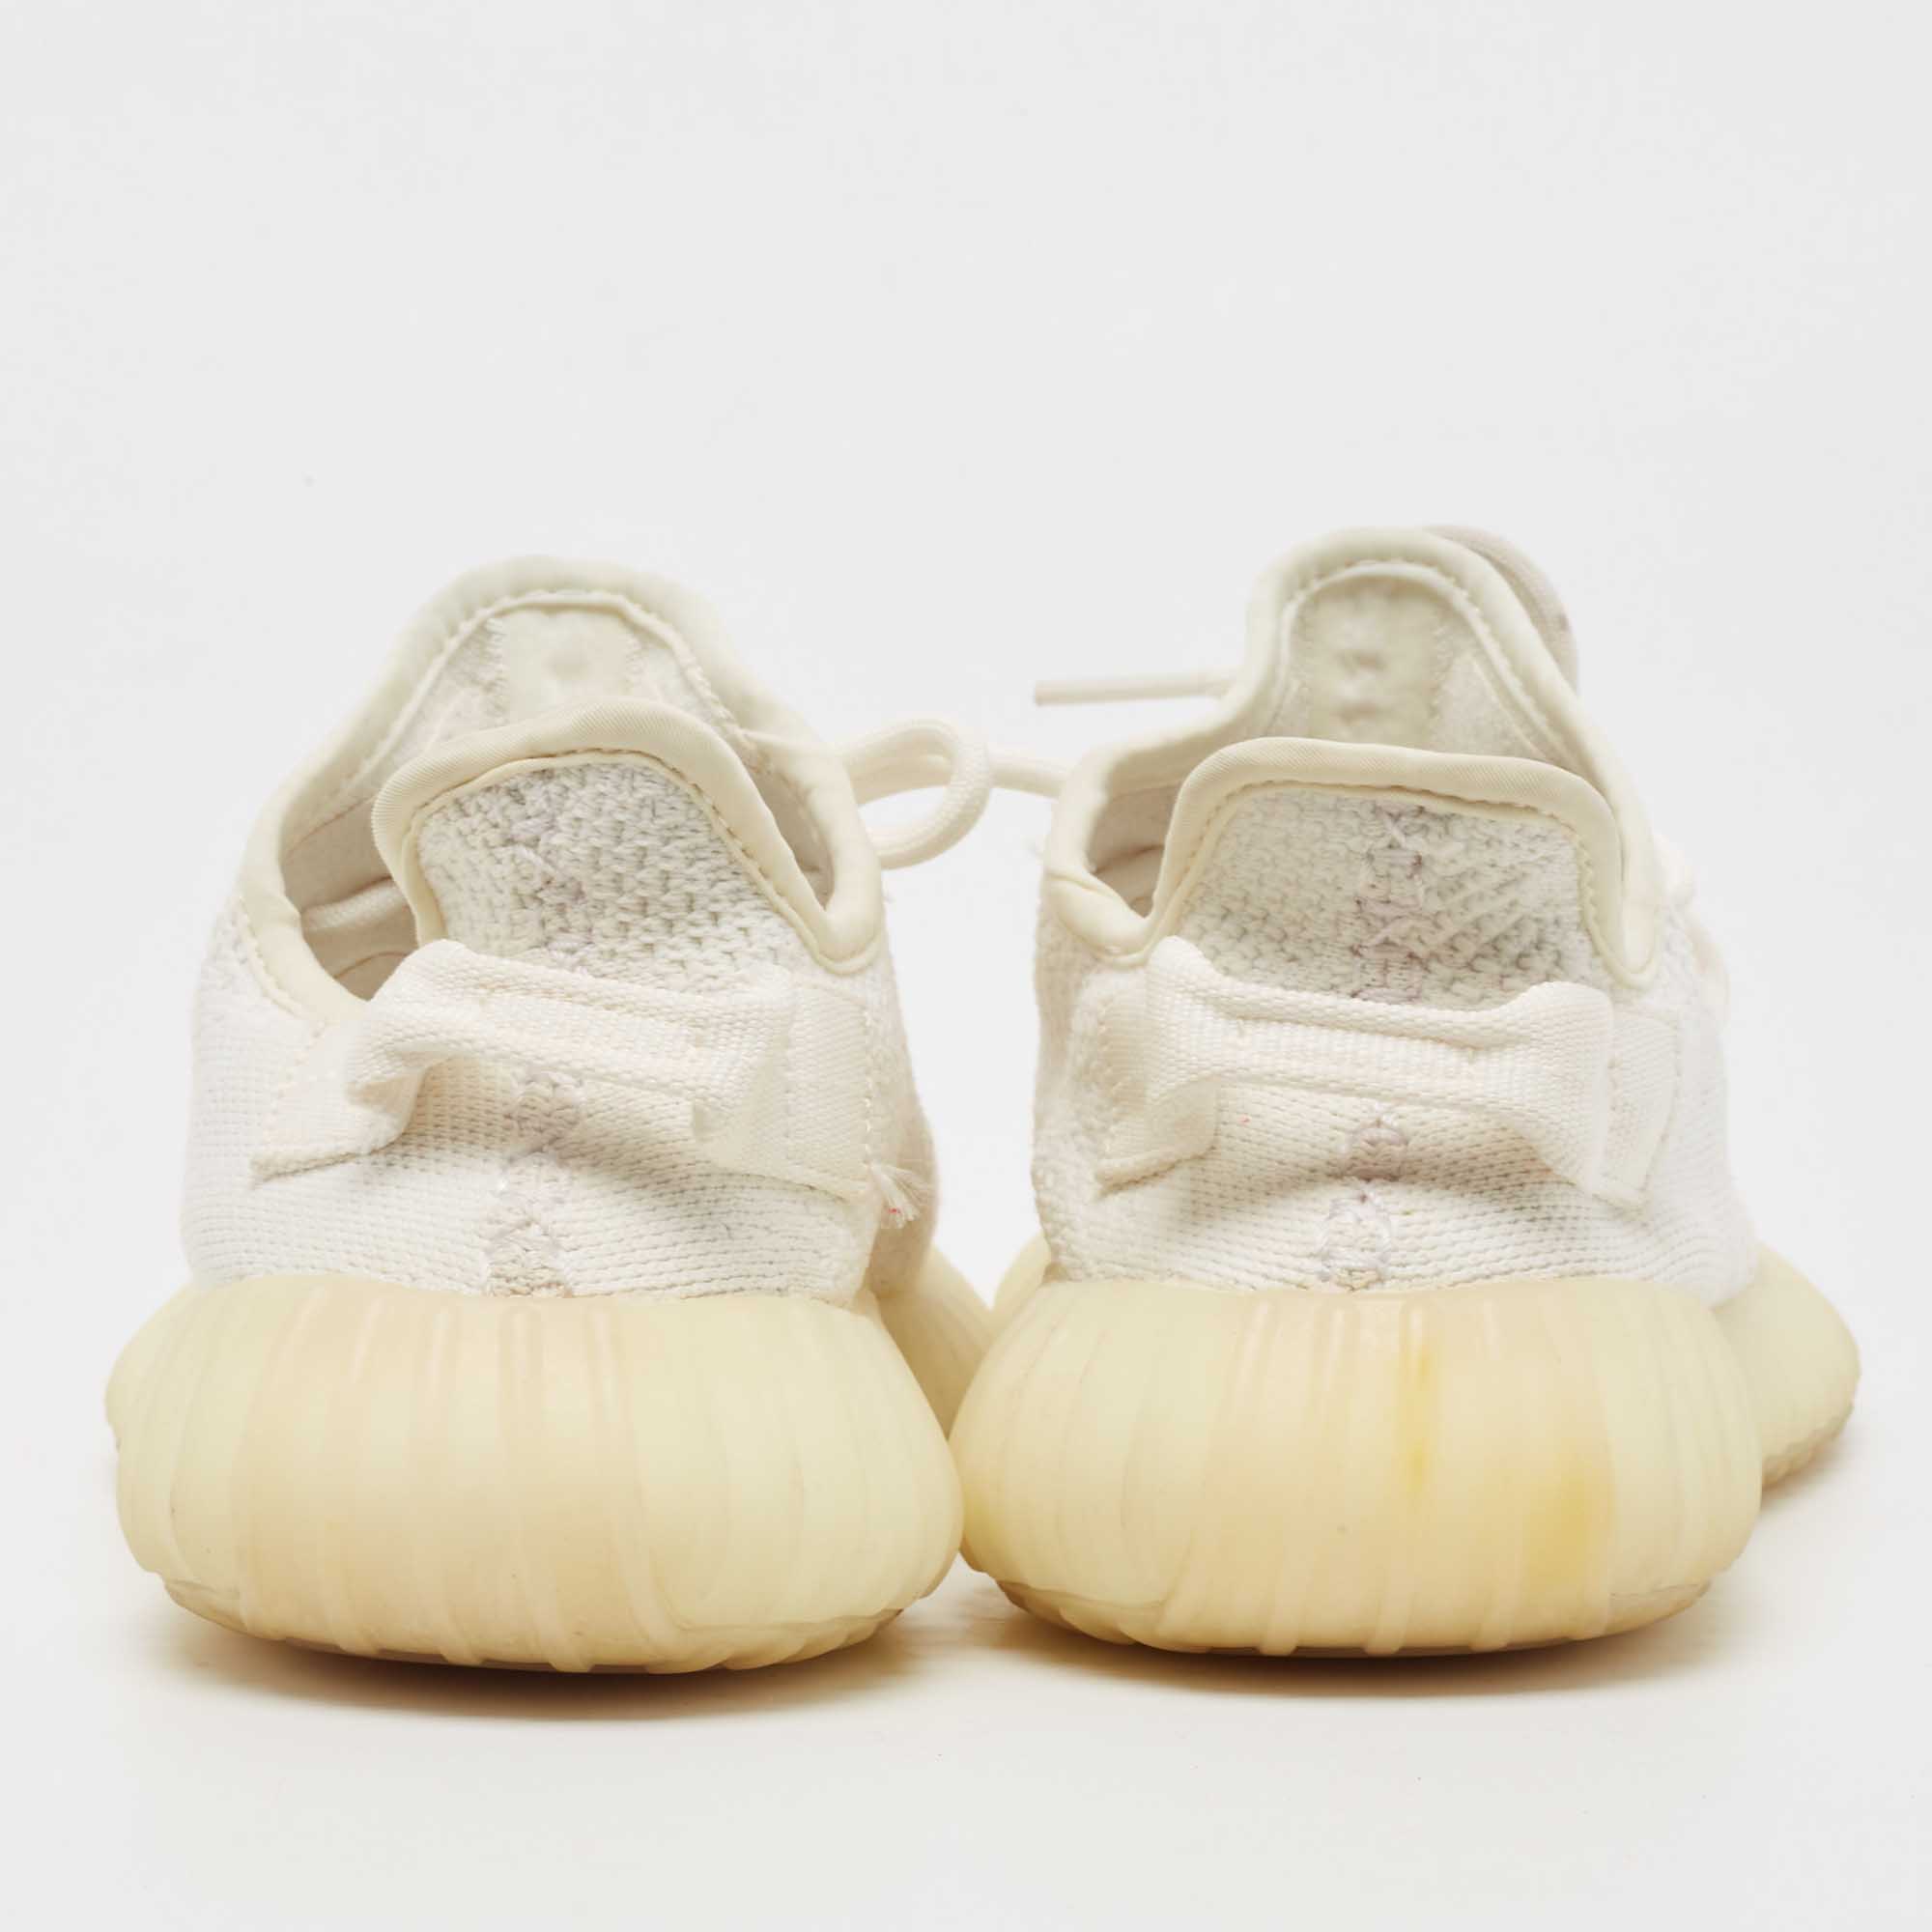 Yeezy X Adidas Cotton Knit Boost 350 V2 Triple White Sneakers Size FR 37 1/3